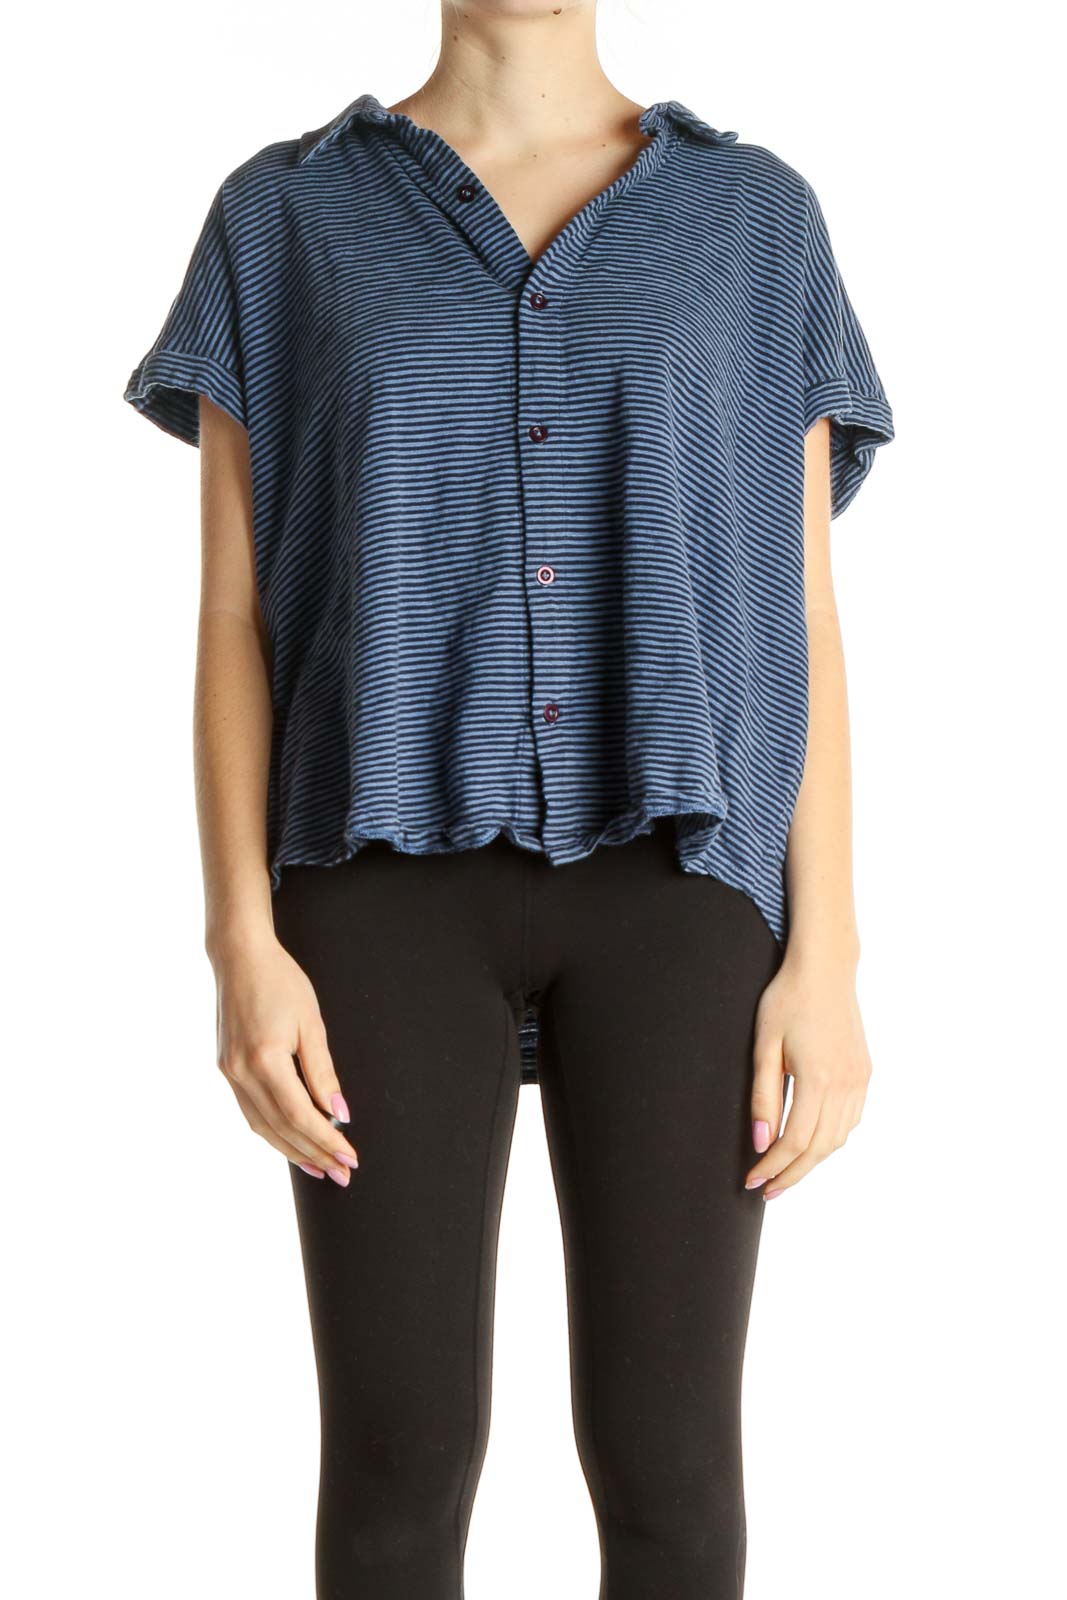 Blue Striped All Day Wear Shirt Front